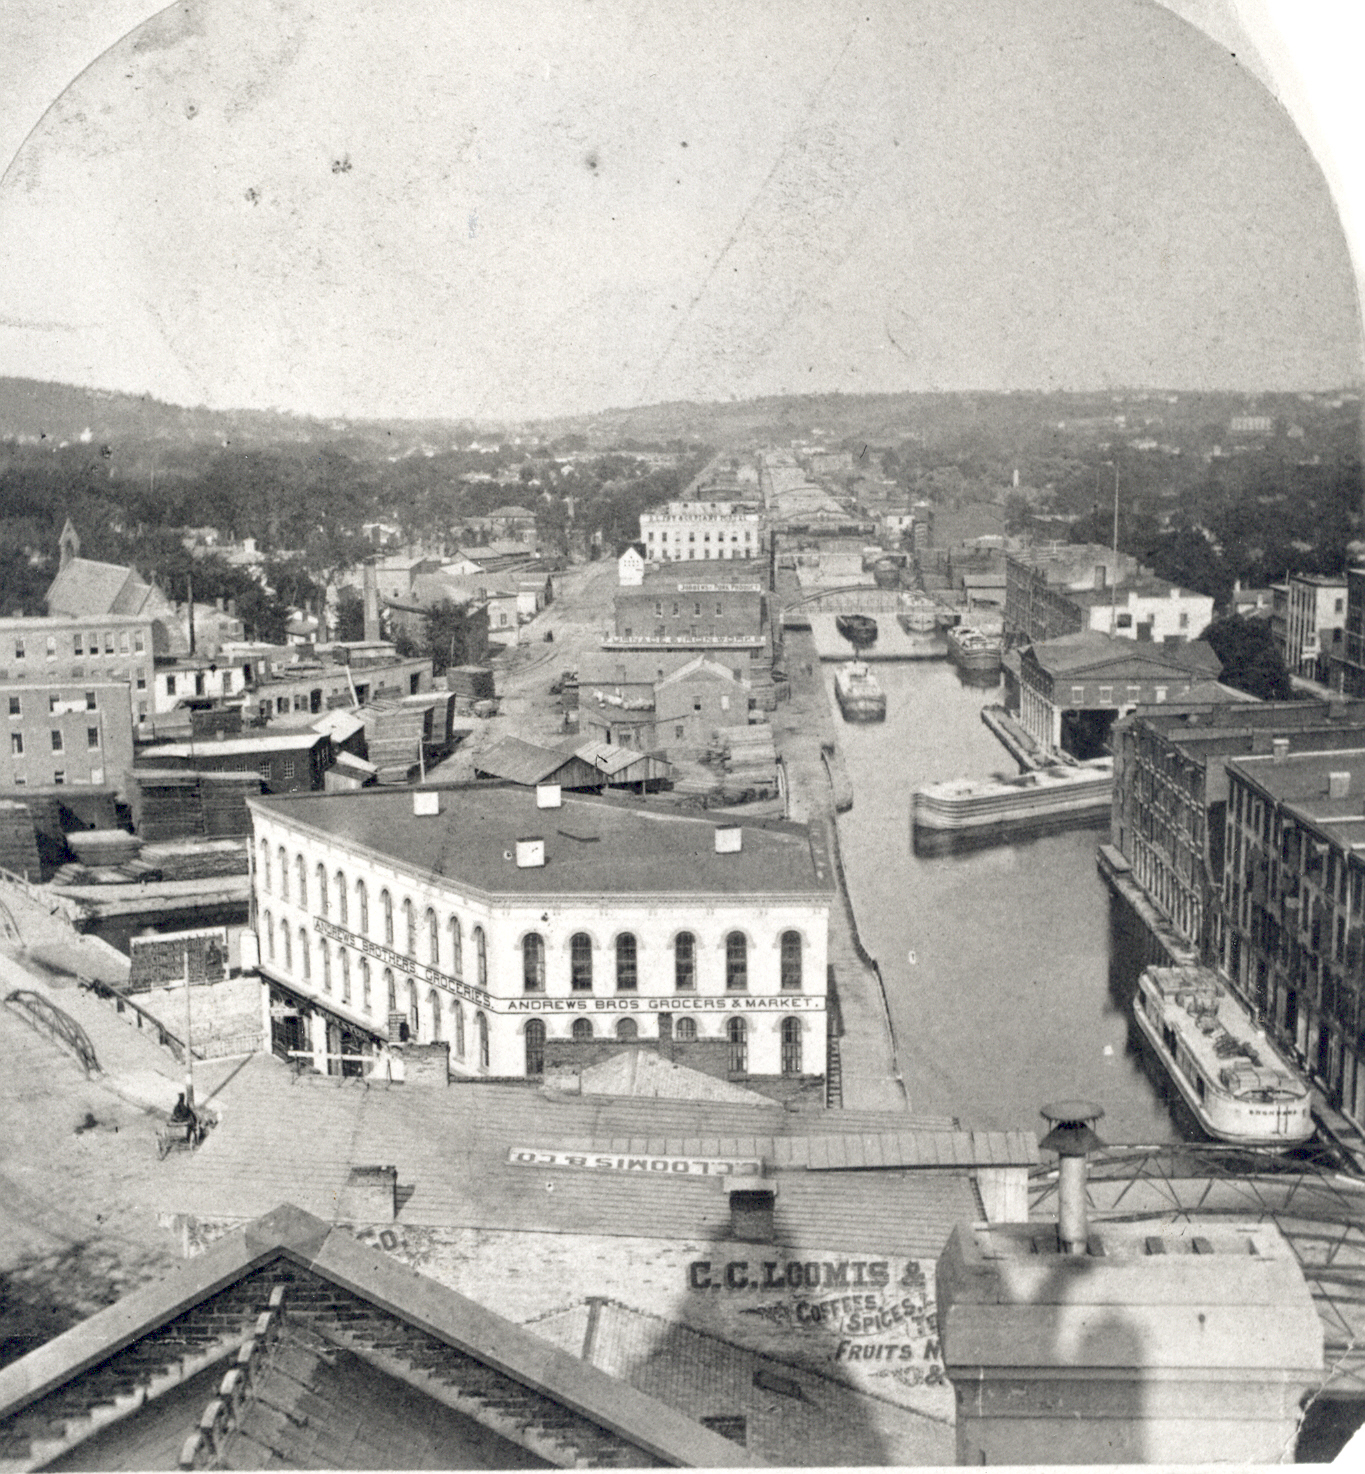 Stereographic image of downtown Syracuse, aerial shot looking east from Clinton Square (with the Syracuse Weighlock, current home of the Erie Canal Museum).